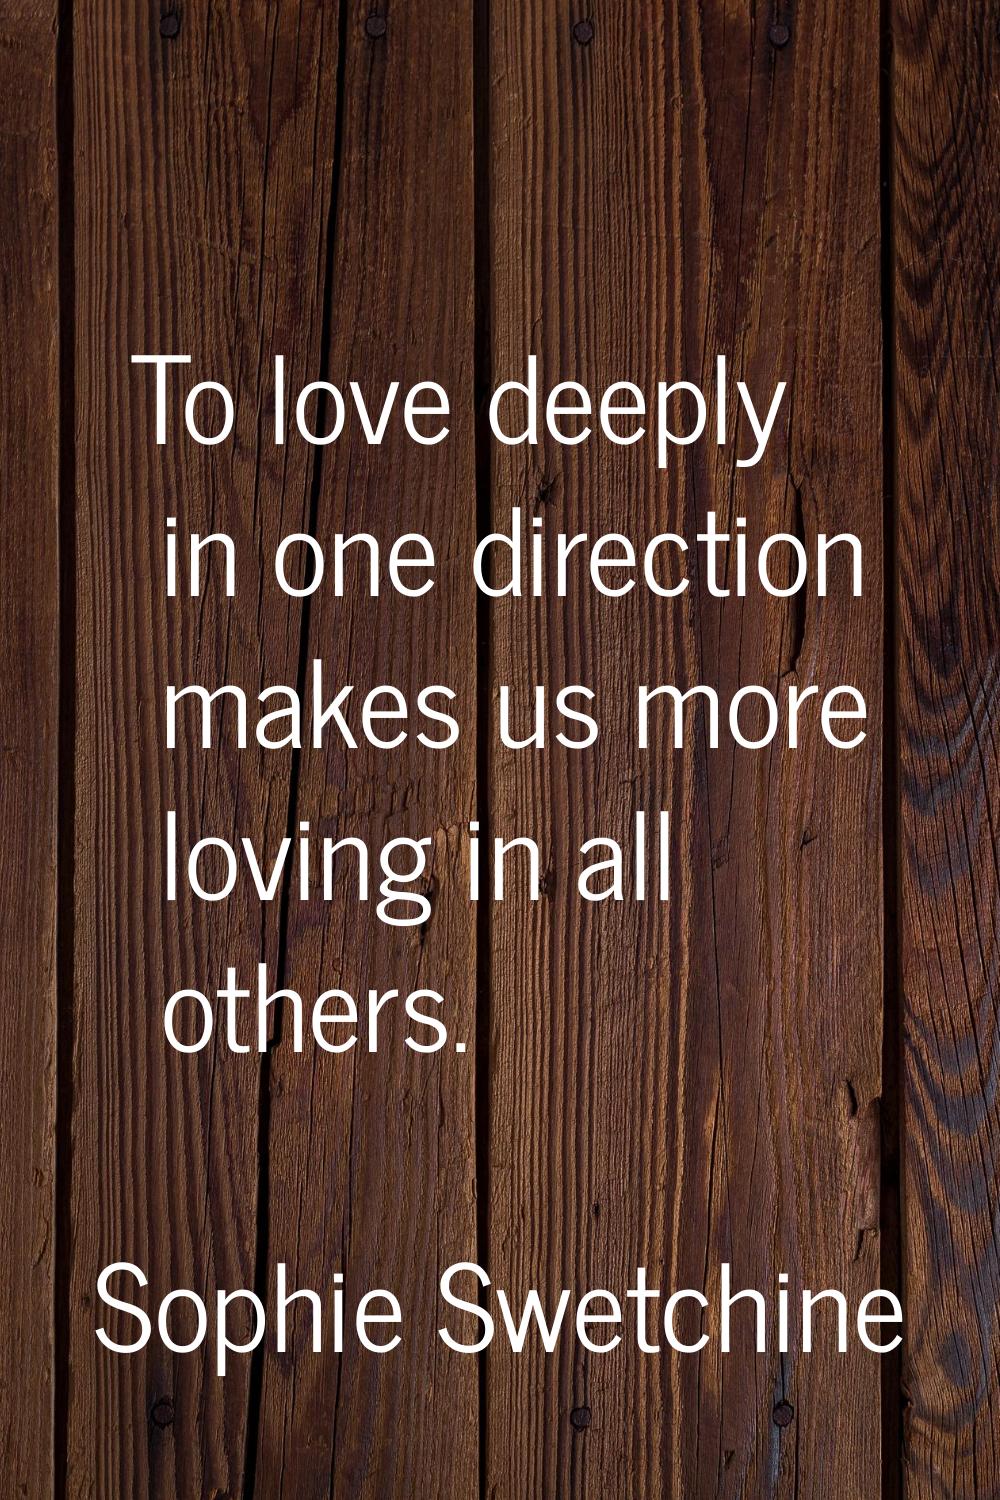 To love deeply in one direction makes us more loving in all others.